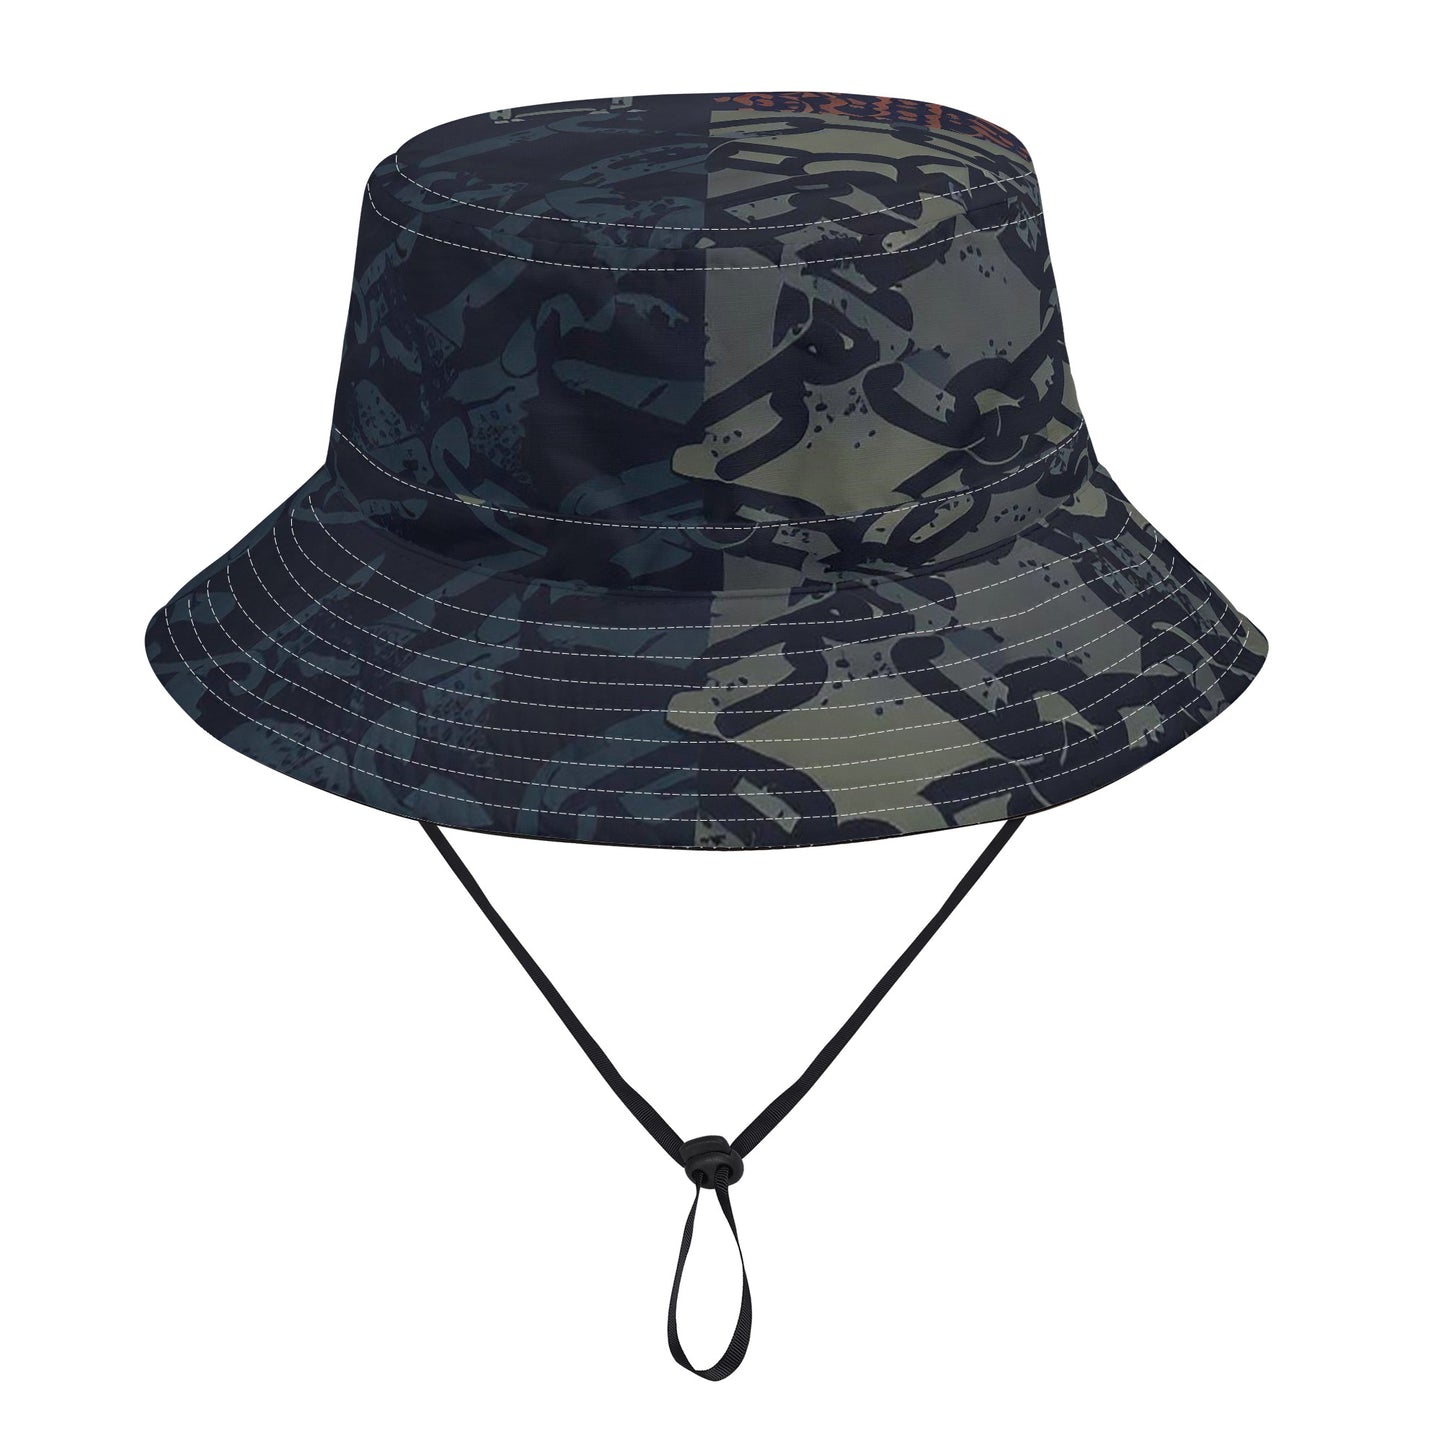 Vampire Art Grunge Unisex Bucket Fisherman's Hat - Chains with Rust Patchwork with Adjustable String